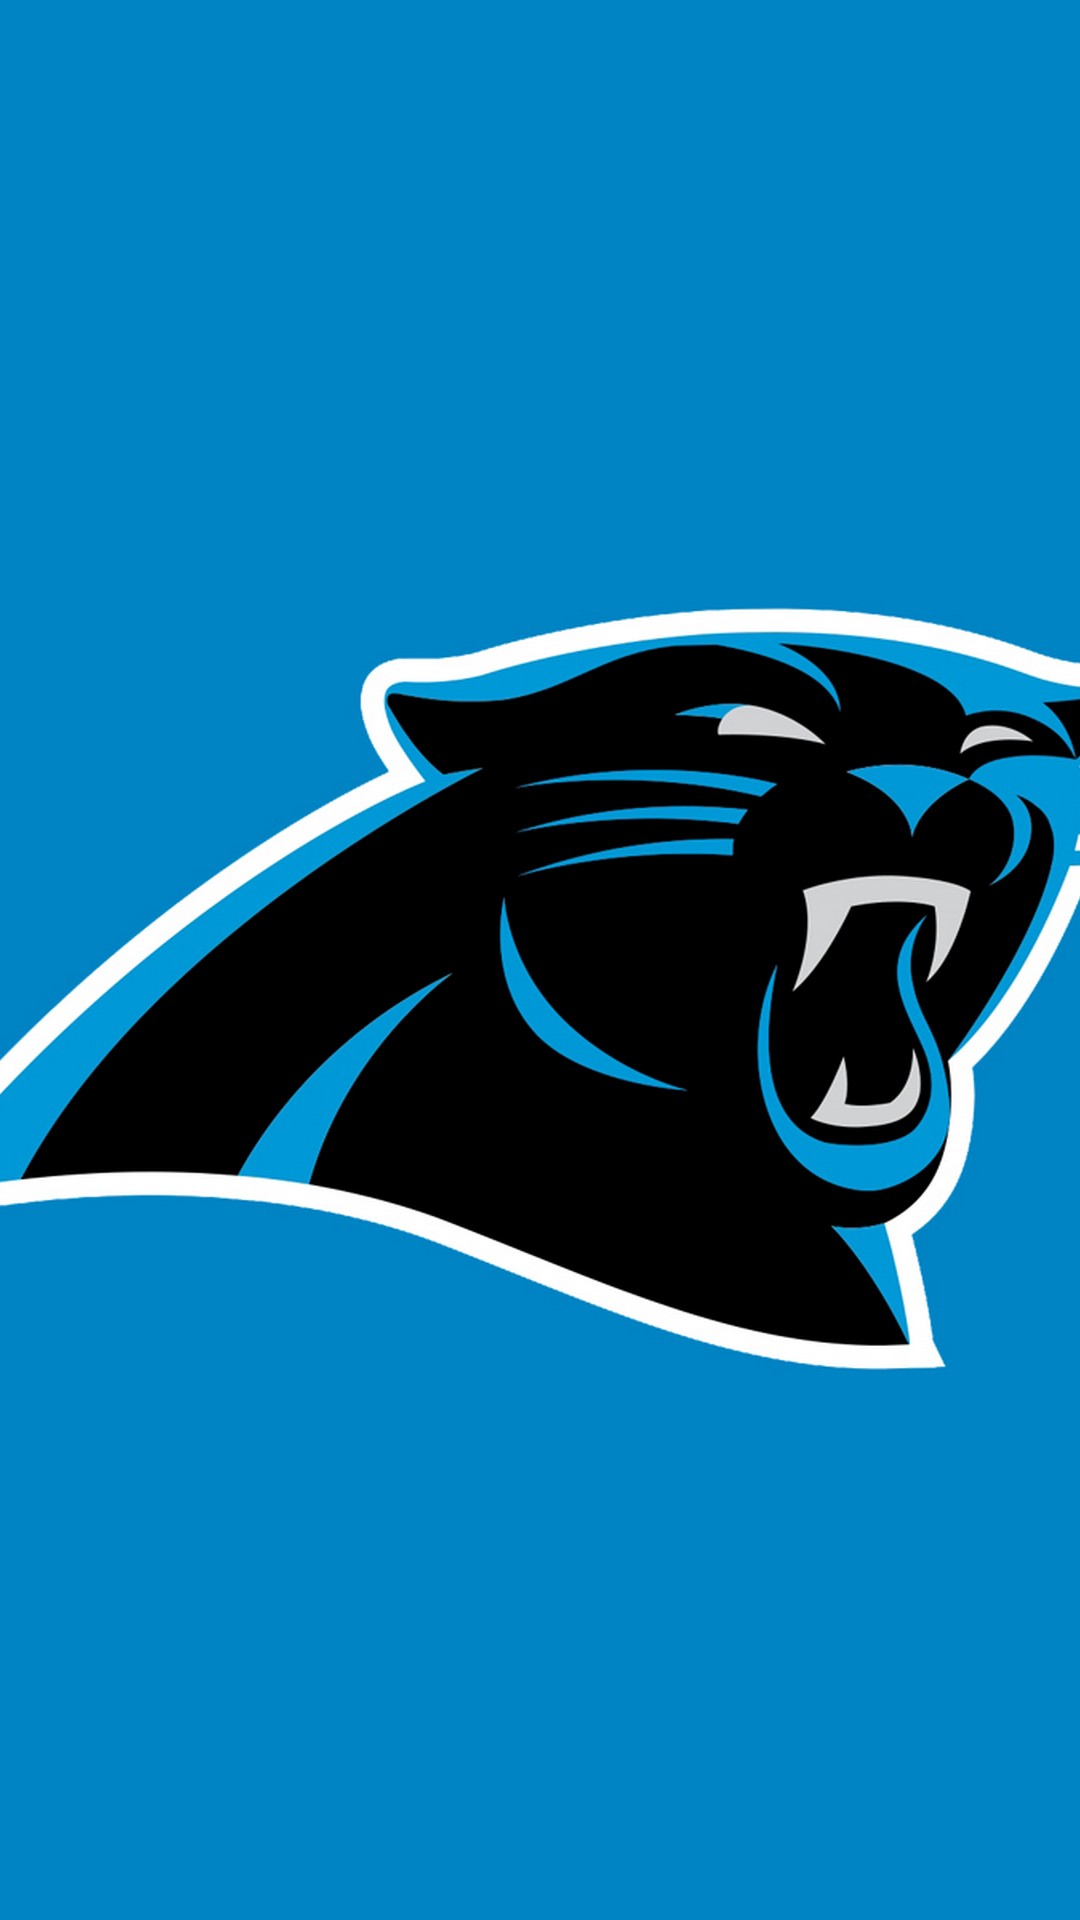 Wallpapers iPhone Carolina Panthers with high-resolution 1080x1920 pixel. Donwload and set as wallpaper for your iPhone X, iPhone XS home screen backgrounds, XS Max, XR, iPhone8 lock screen wallpaper, iPhone 7, 6, SE and other mobile devices